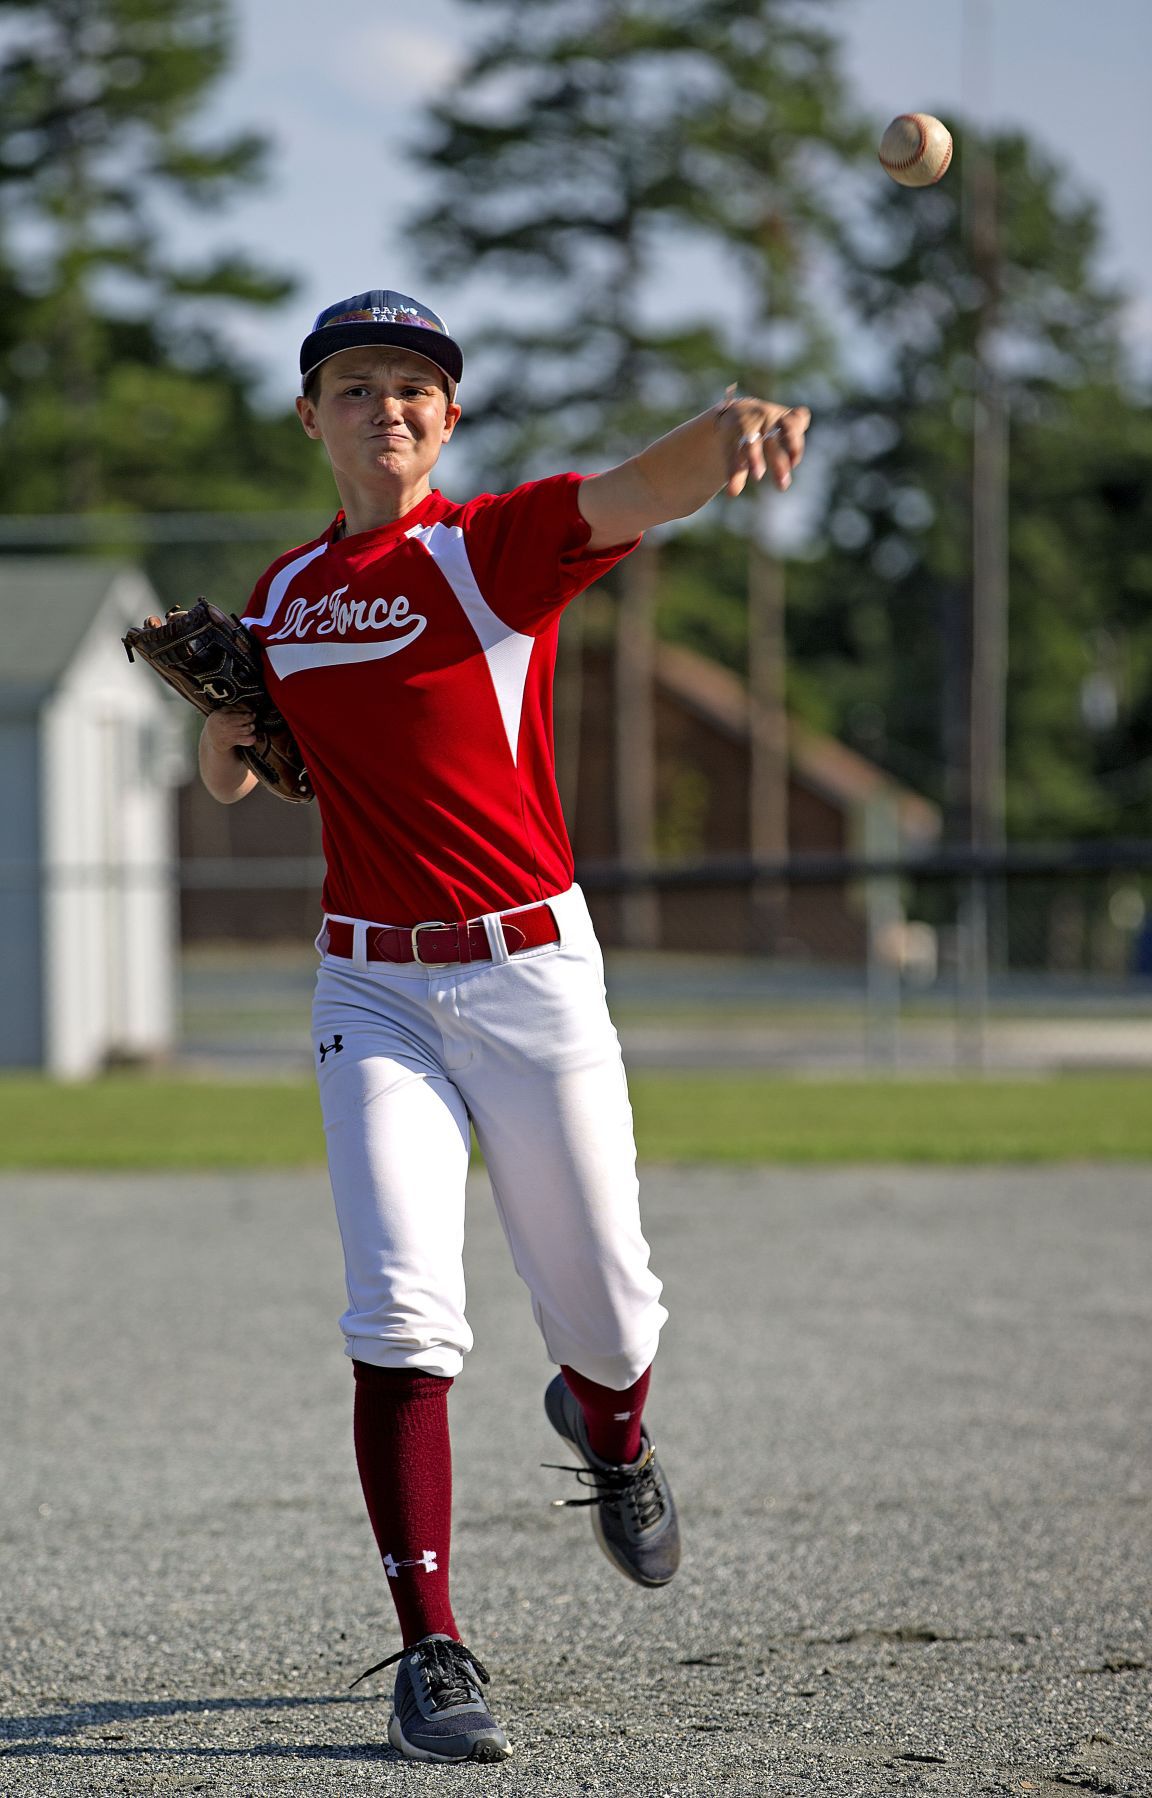 Missing hand doesn't define baseball-playing girl Brittany Apgar ...